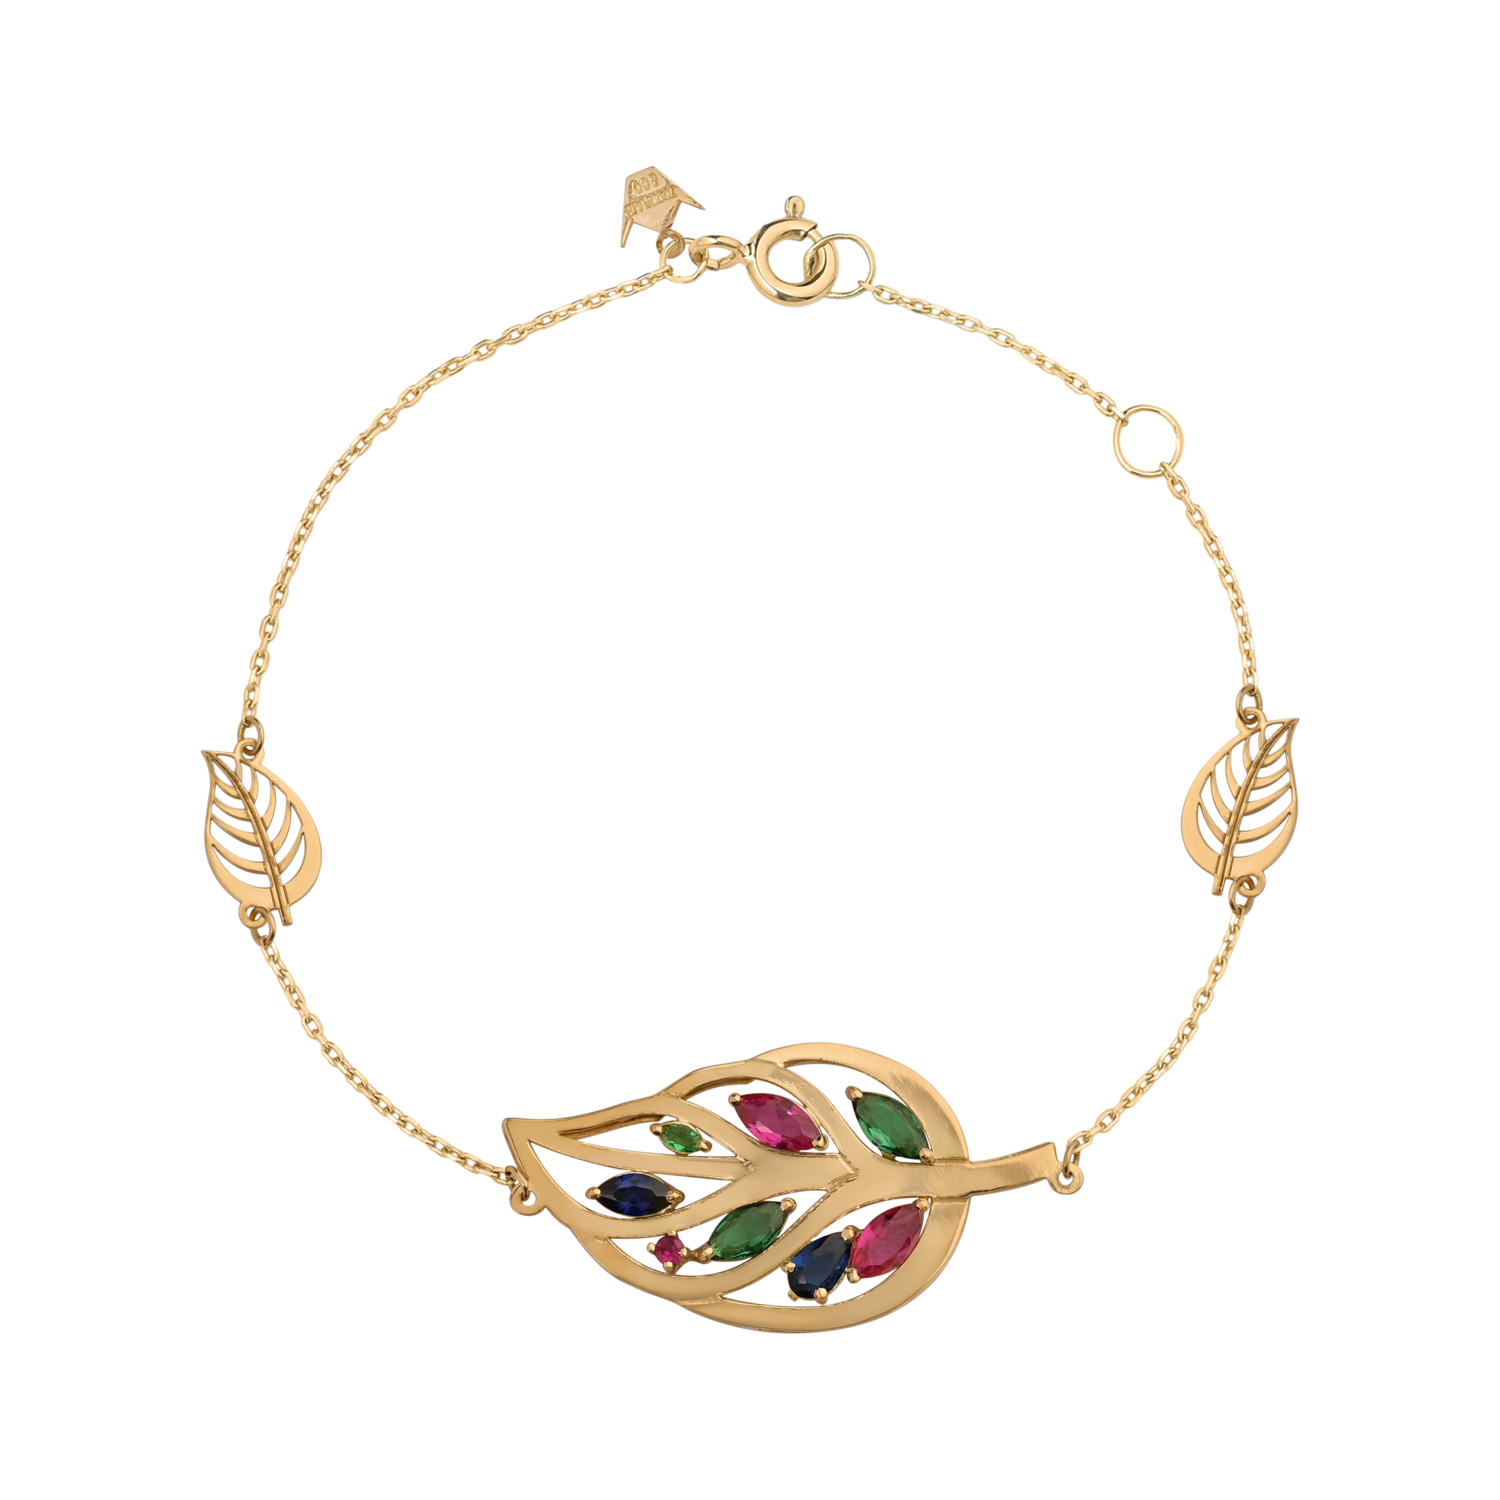 Leaves Gold Bracelet with Colored Stones